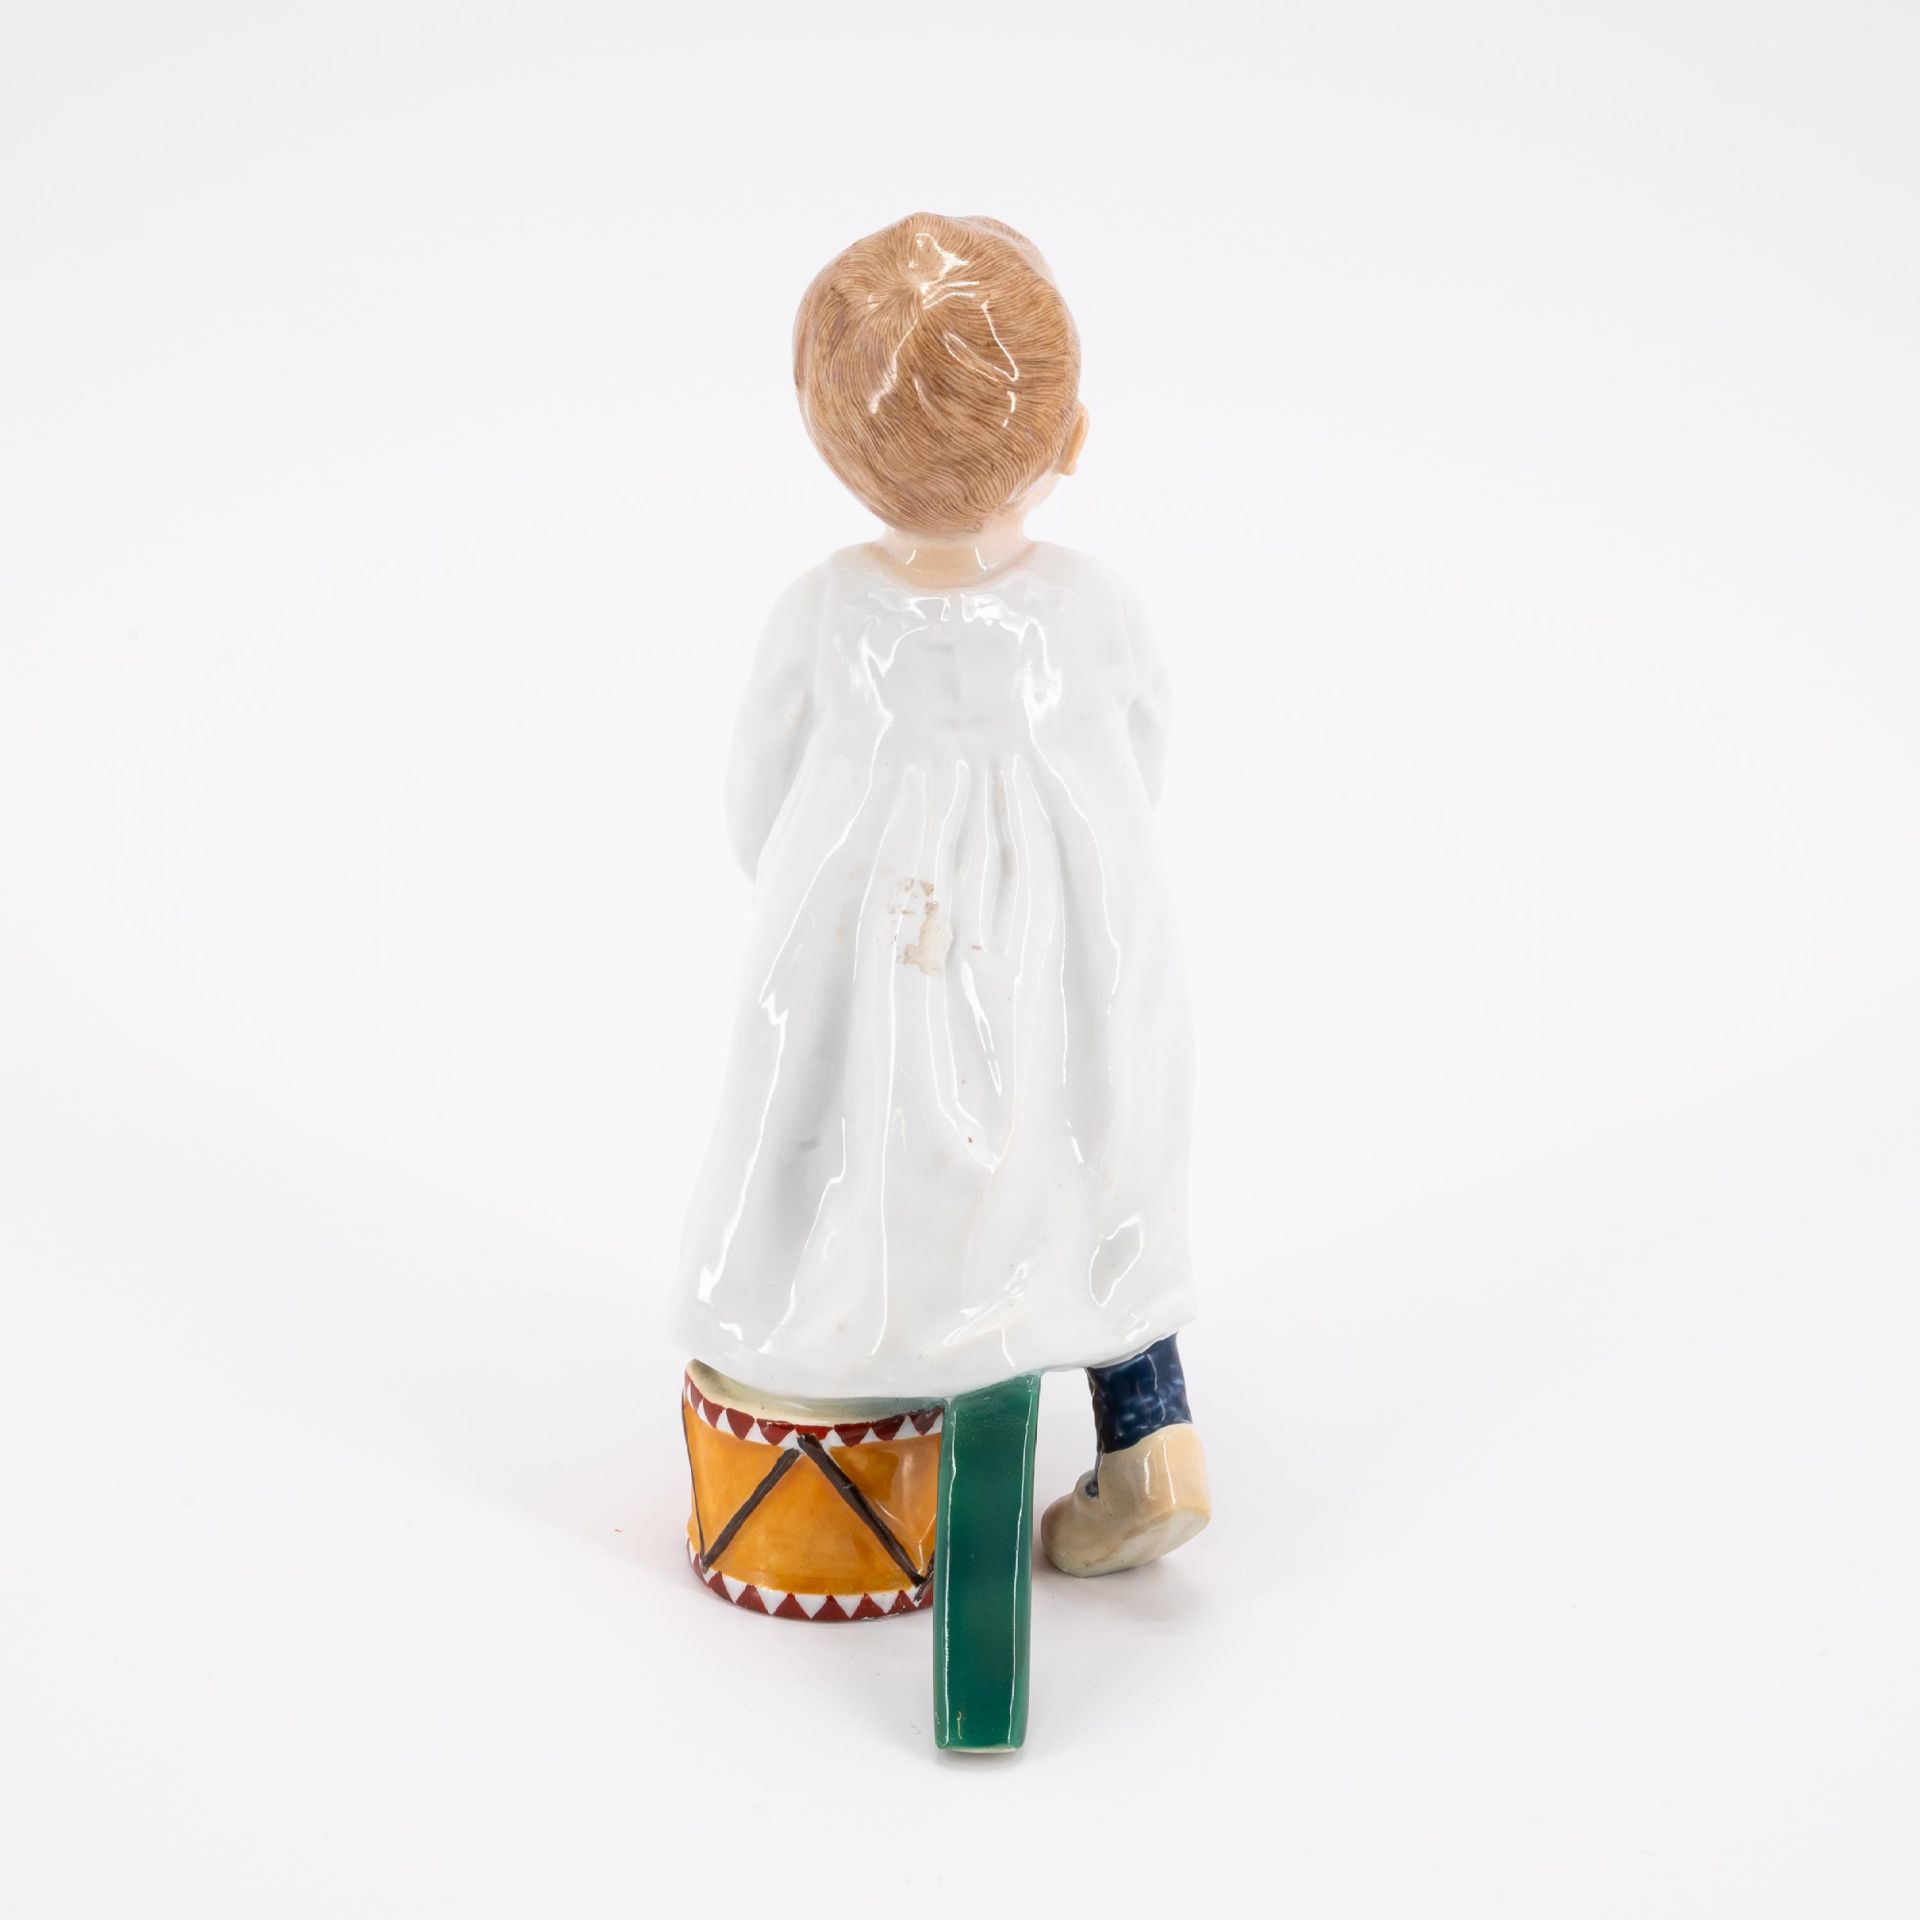 Meissen: PORCELAIN FIGURINE OF A BOY WITH STICK AND DRUM - Image 3 of 5